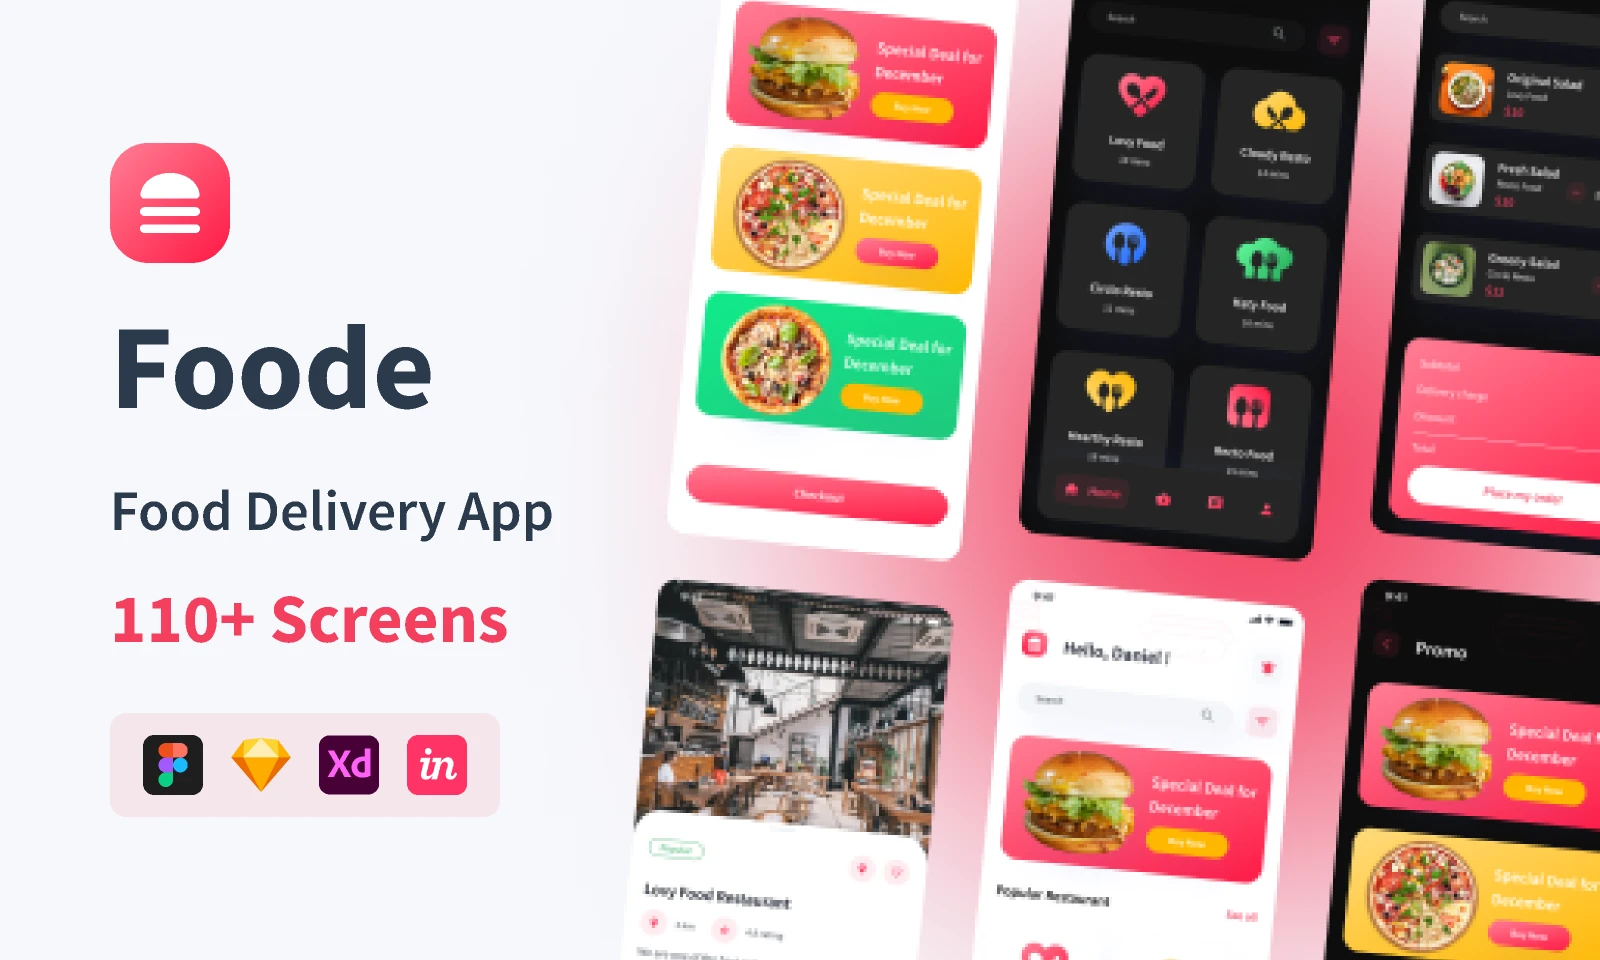 Foode - Food Delivery Mobile App UI Kit for Figma and Adobe XD